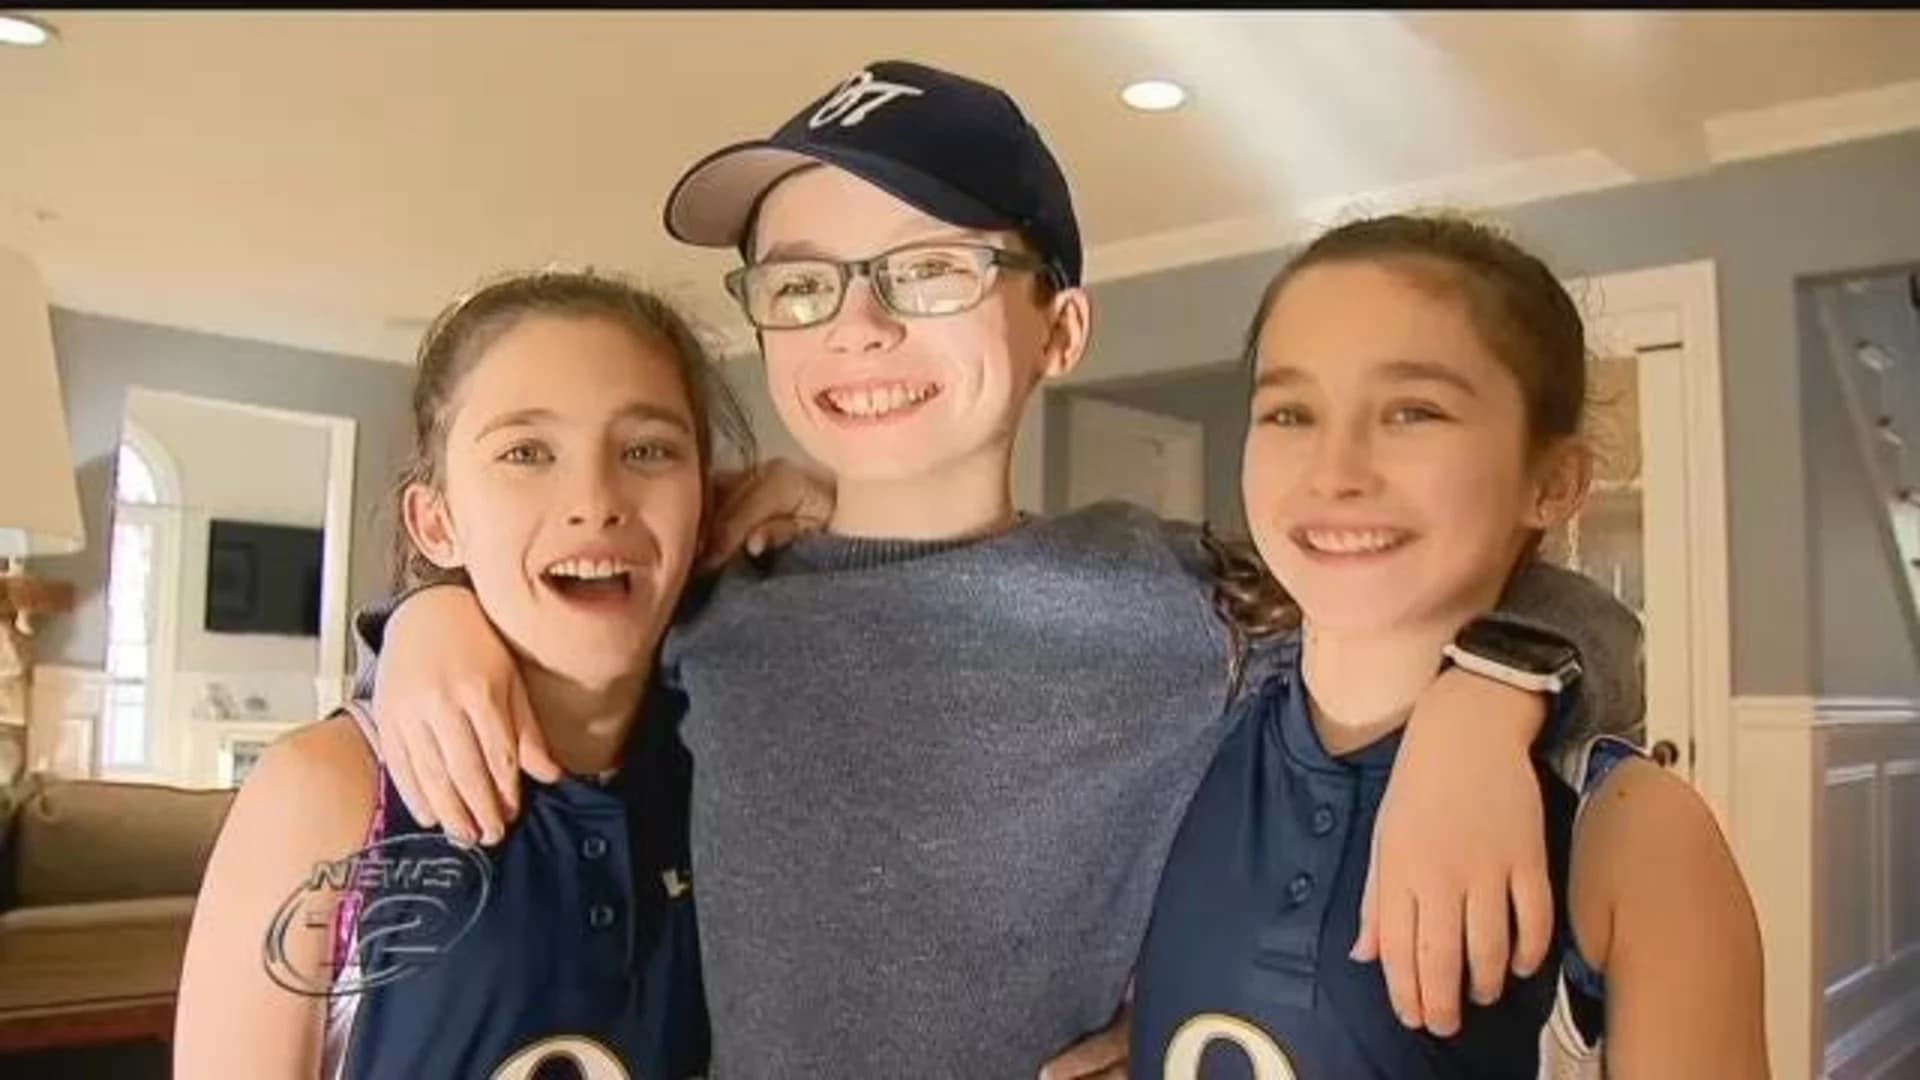 Recreational softball league won’t let 9-year-old boy play with his sisters